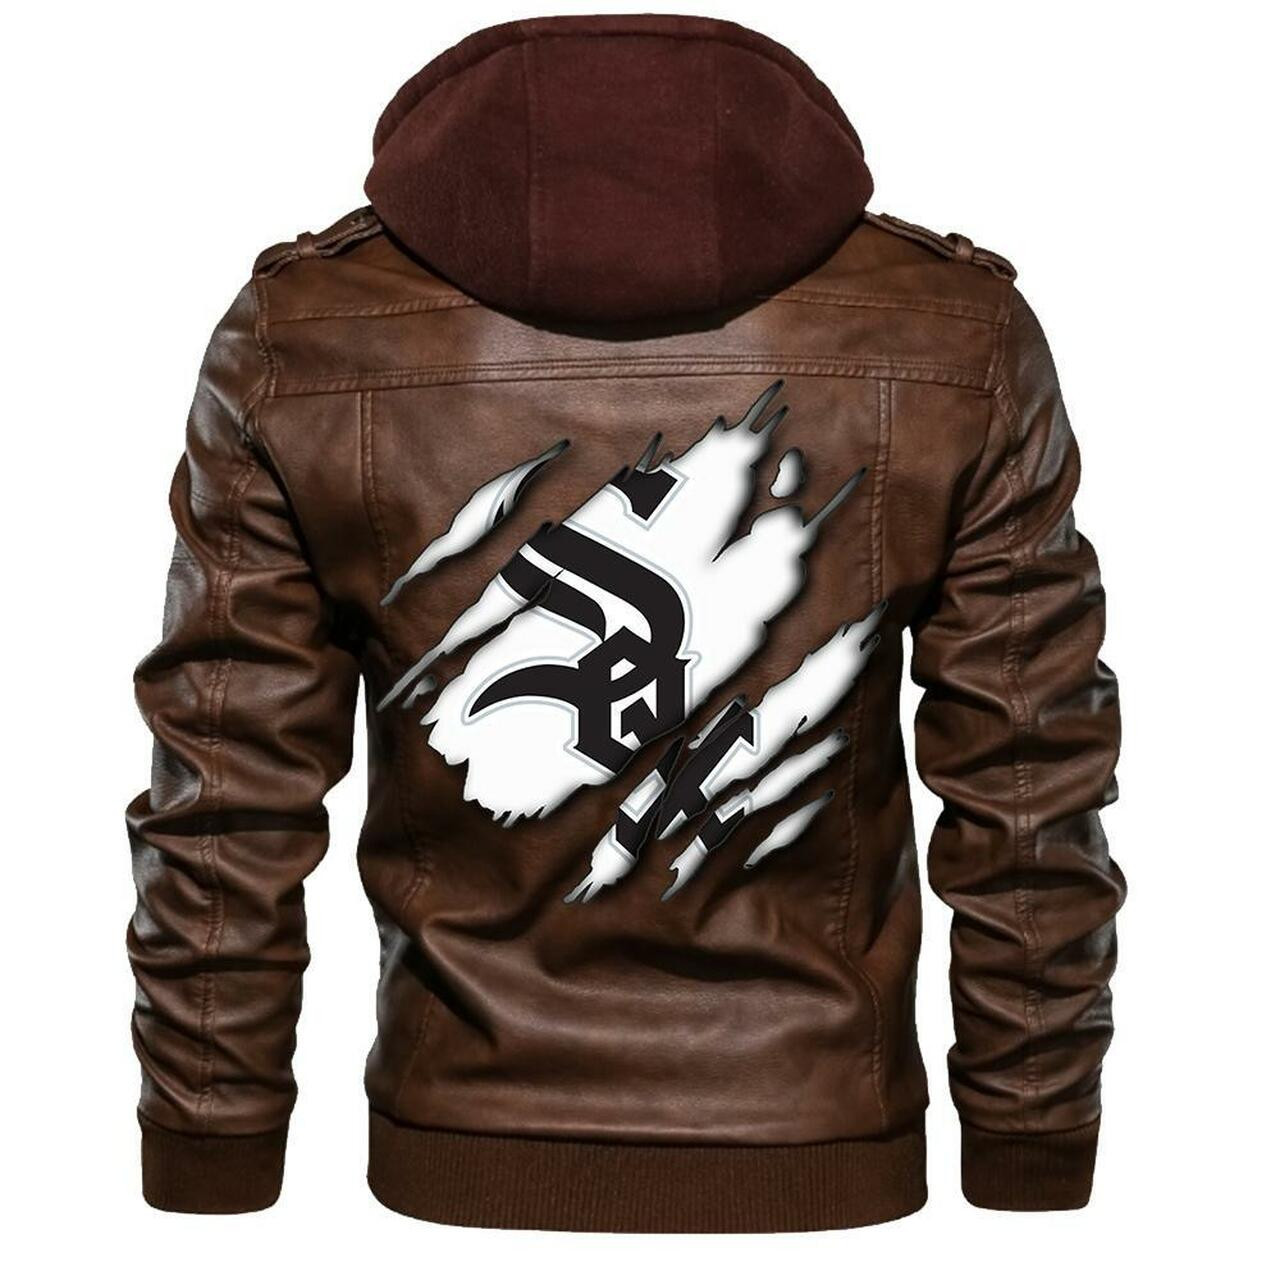 Check out our collection of the latest and greatest leather jacket 99